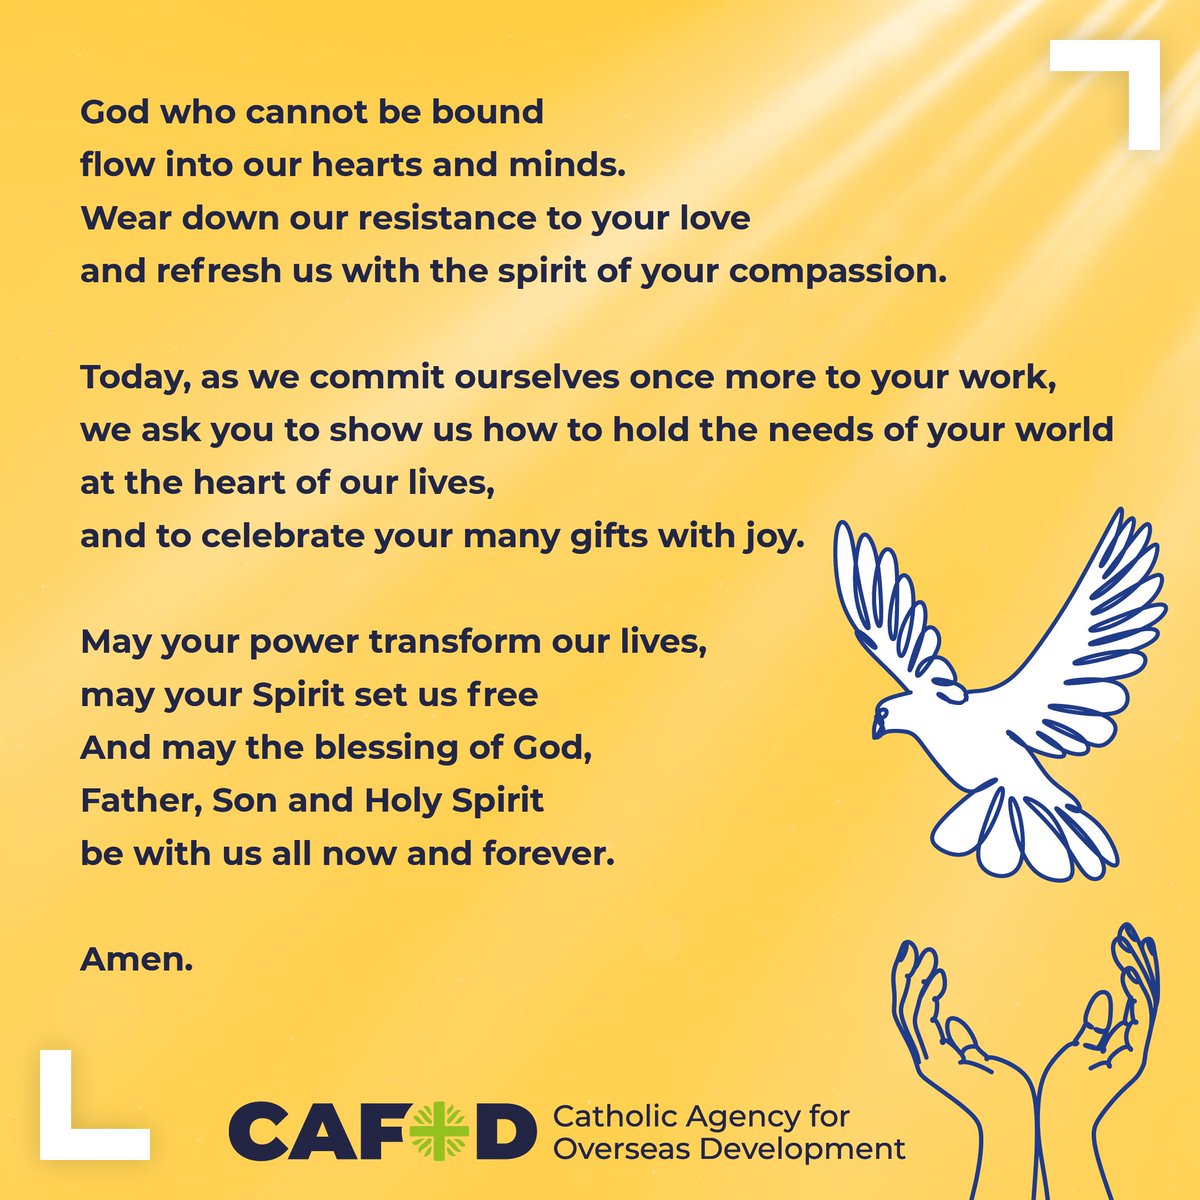 Today is the World Day of Social Justice and we are praying for a fairer world. As we believe in tackling the causes of poverty and injustice, we speak out for justice. Find out more about our latest campaigns ⤵️ cafod.org.uk/campaign/lates…